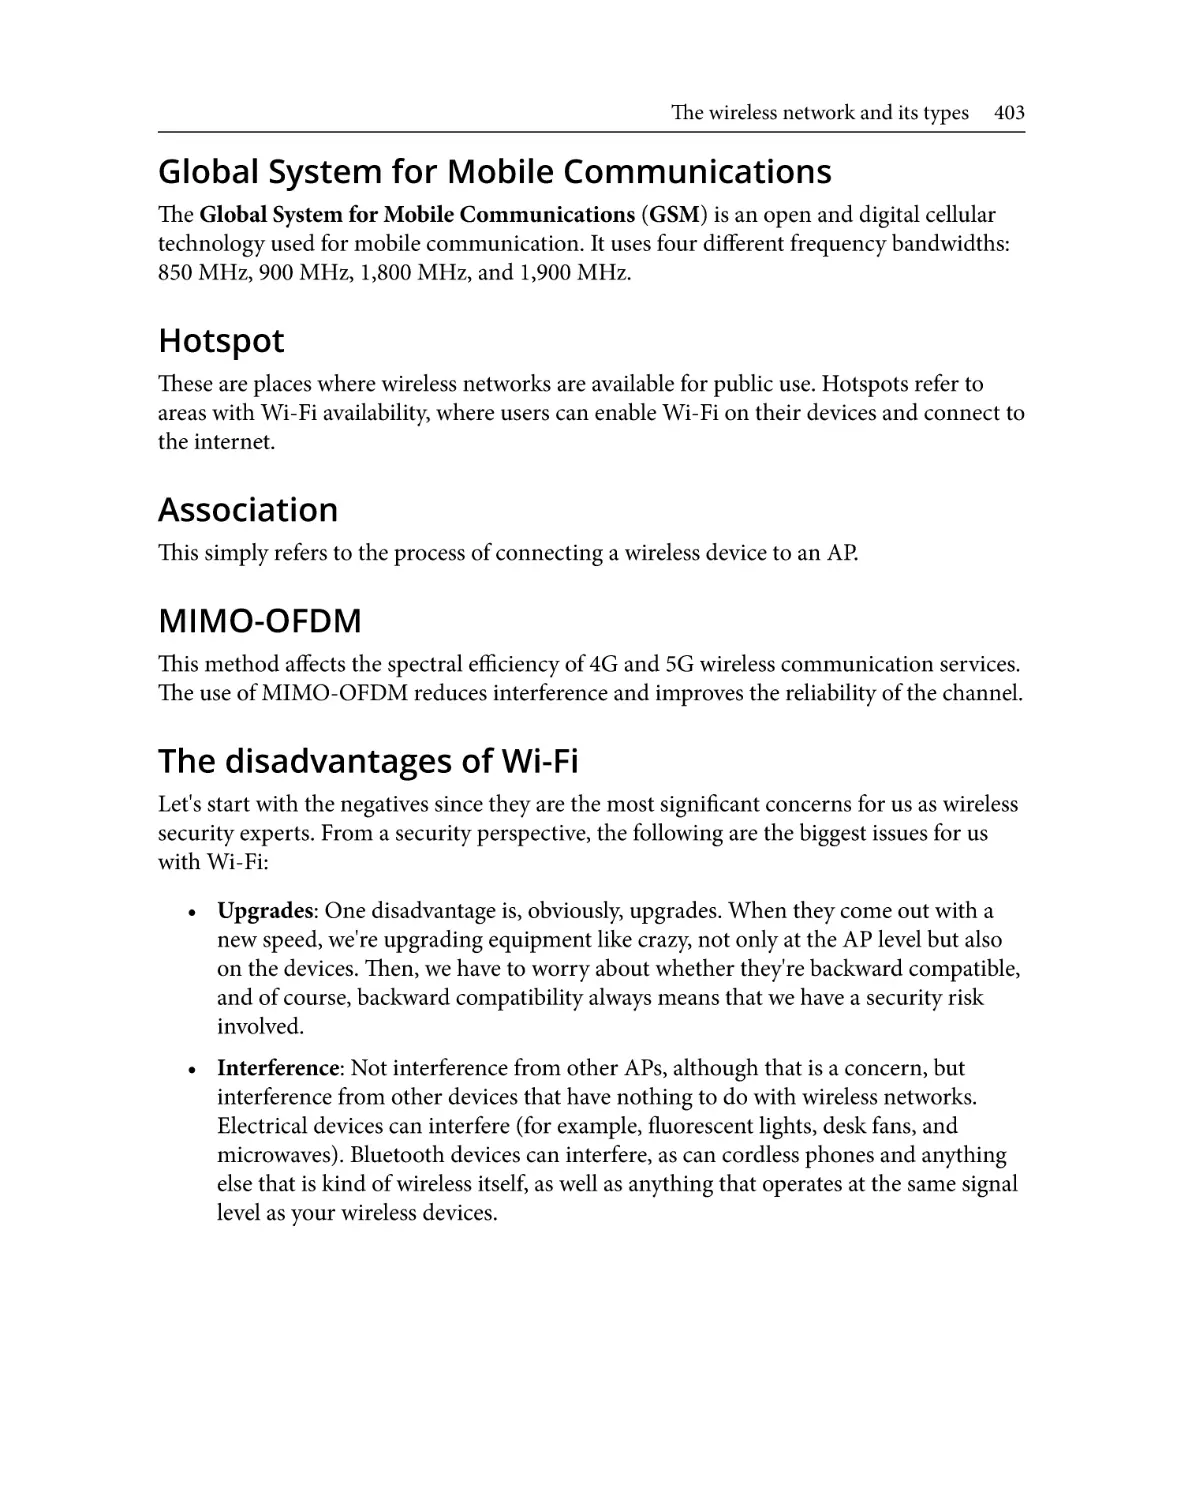 Global System for Mobile Communications
Hotspot
Association
MIMO-OFDM
The disadvantages of Wi-Fi